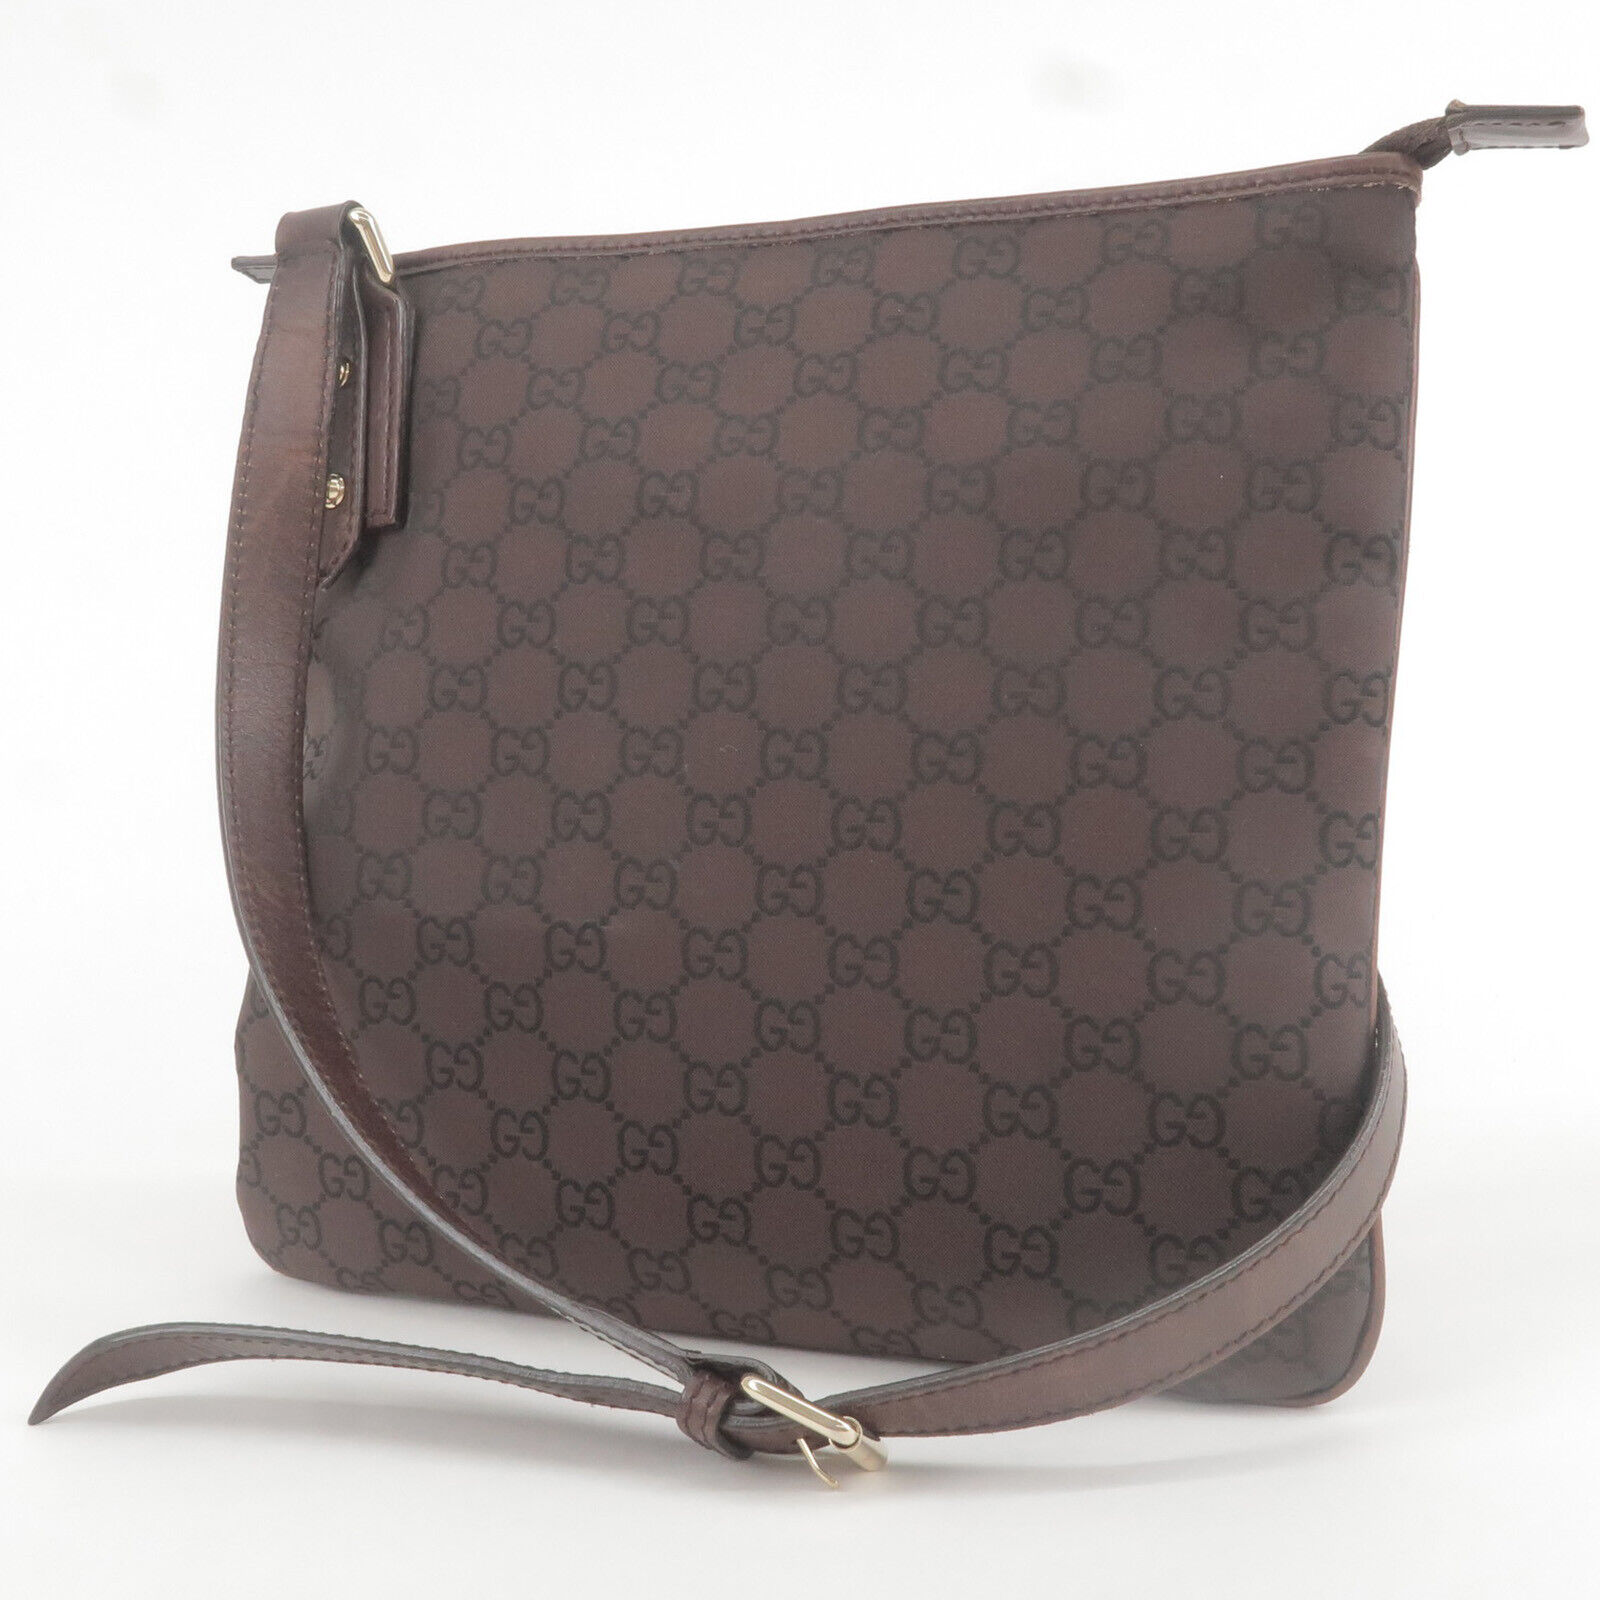 Auth GUCCI GG Shoulder Bag Purse Brown Nylon Leather 257246 Used